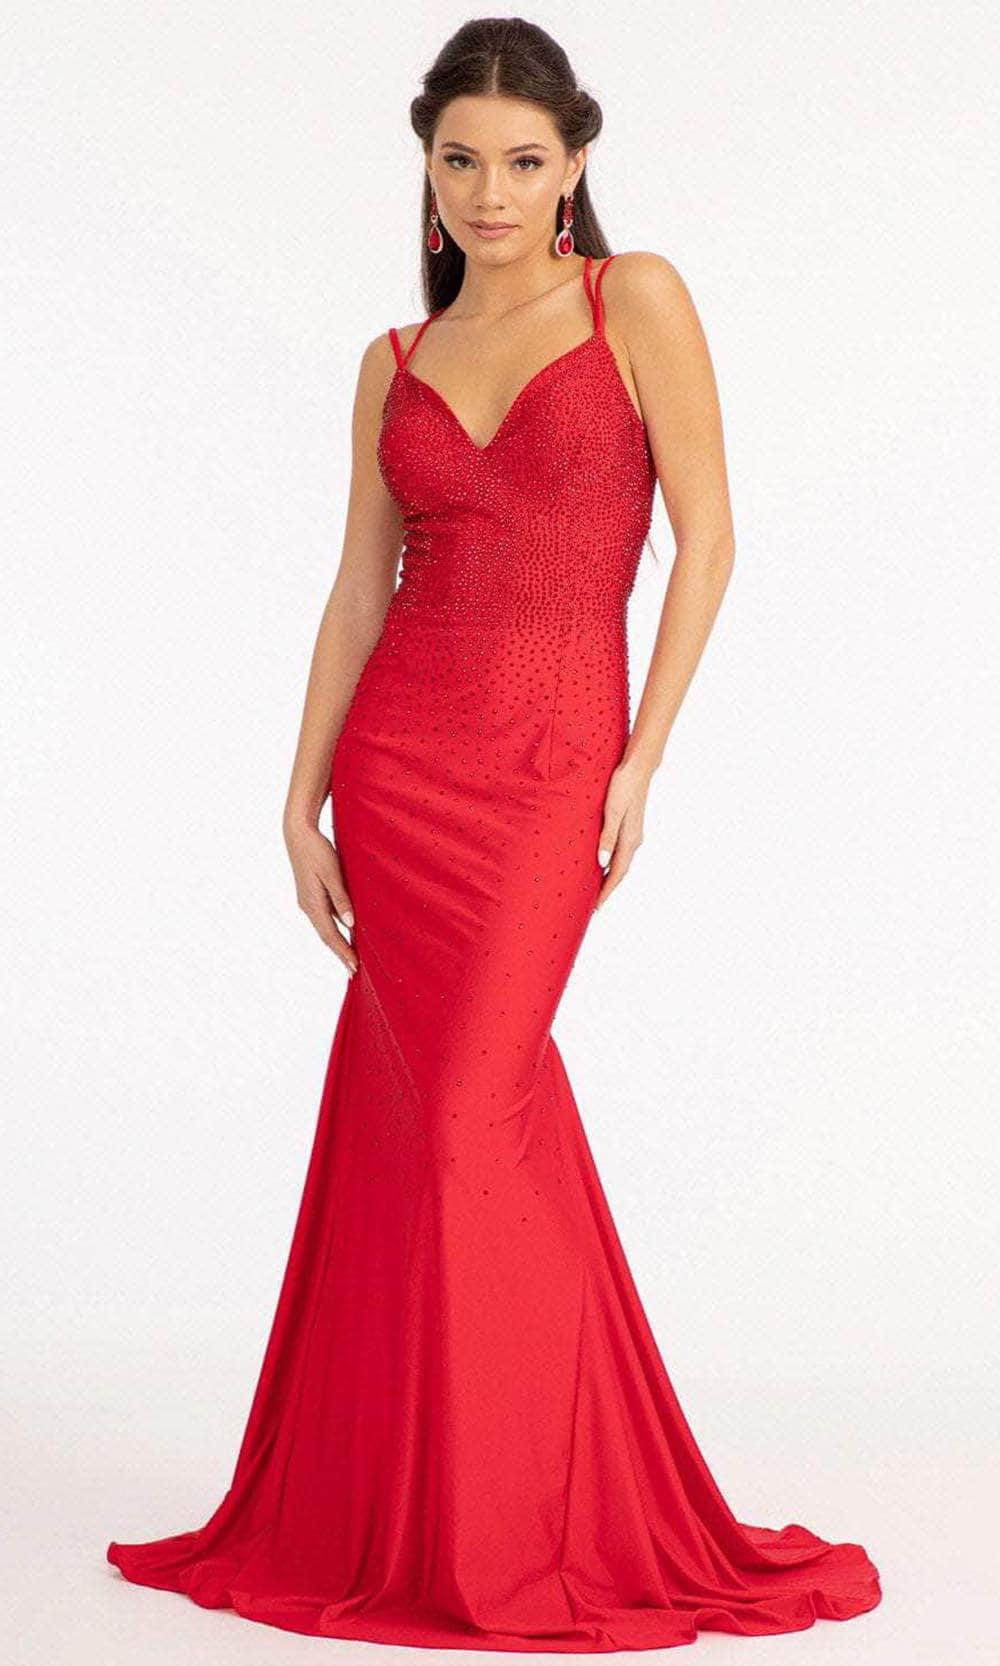 GLS by Gloria GL3036 - Sleeveless Beaded Jersey Evening Gown
